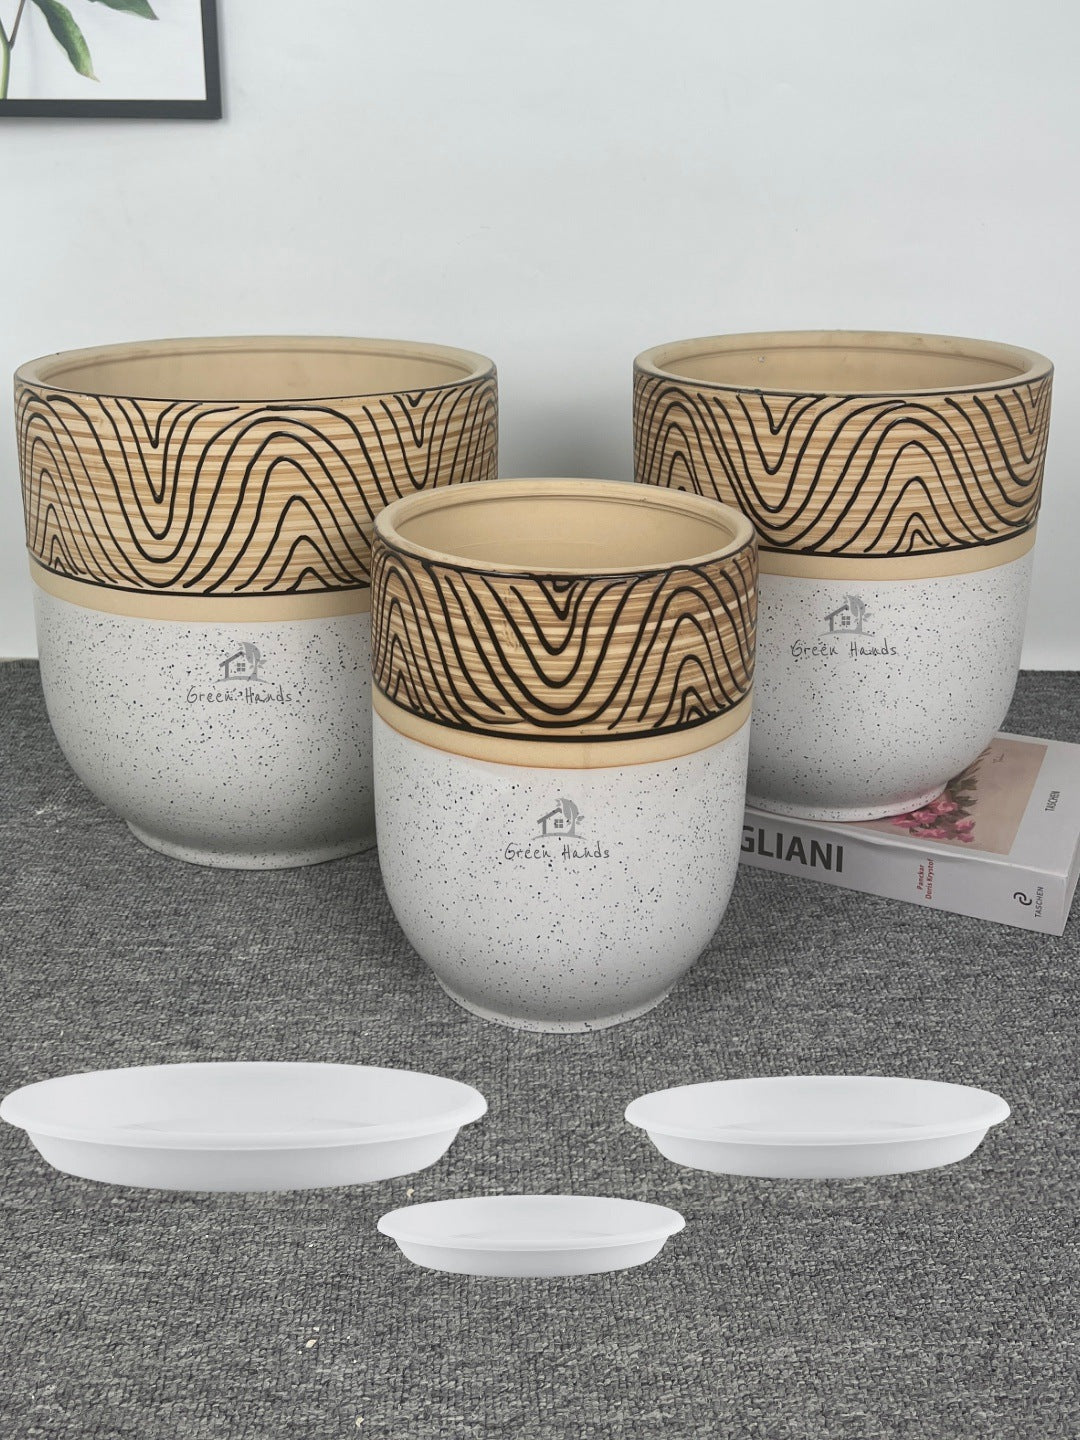 Wooden White Ceramic Pots: Nature-Inspired Artistry in UAE